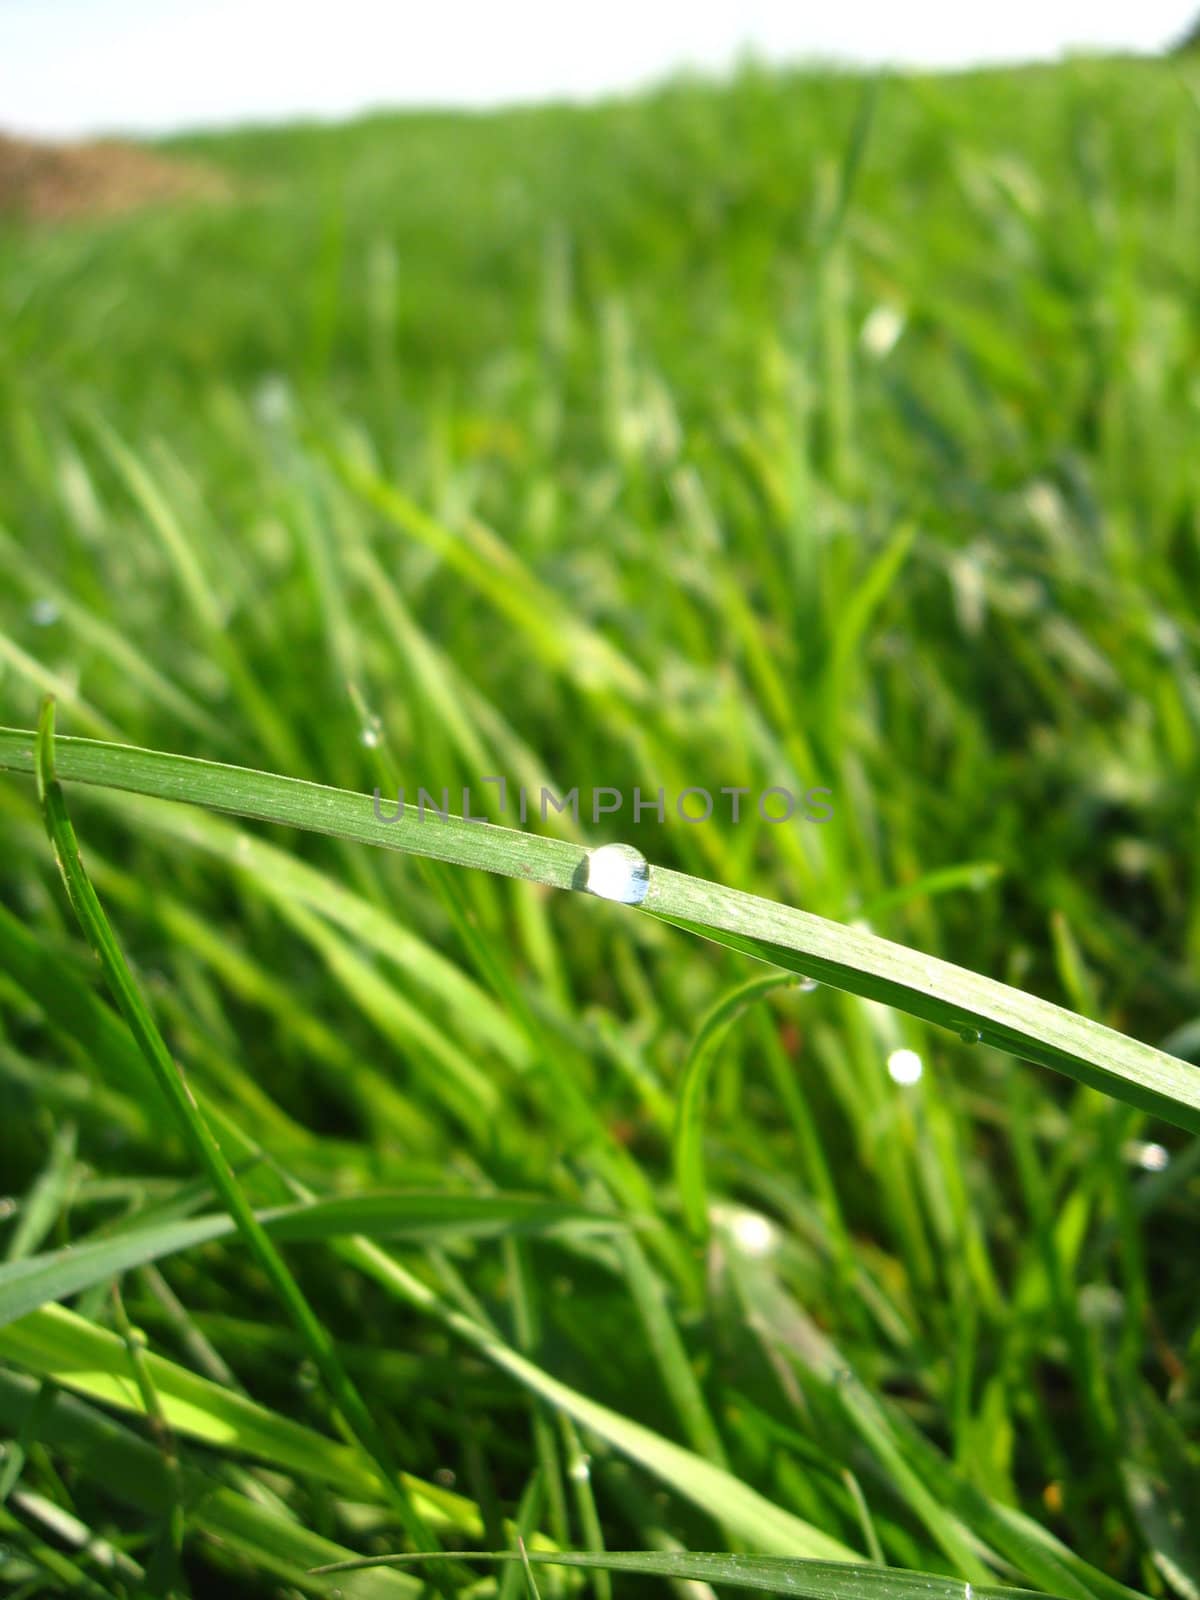 The image of dewdrop on the green blade